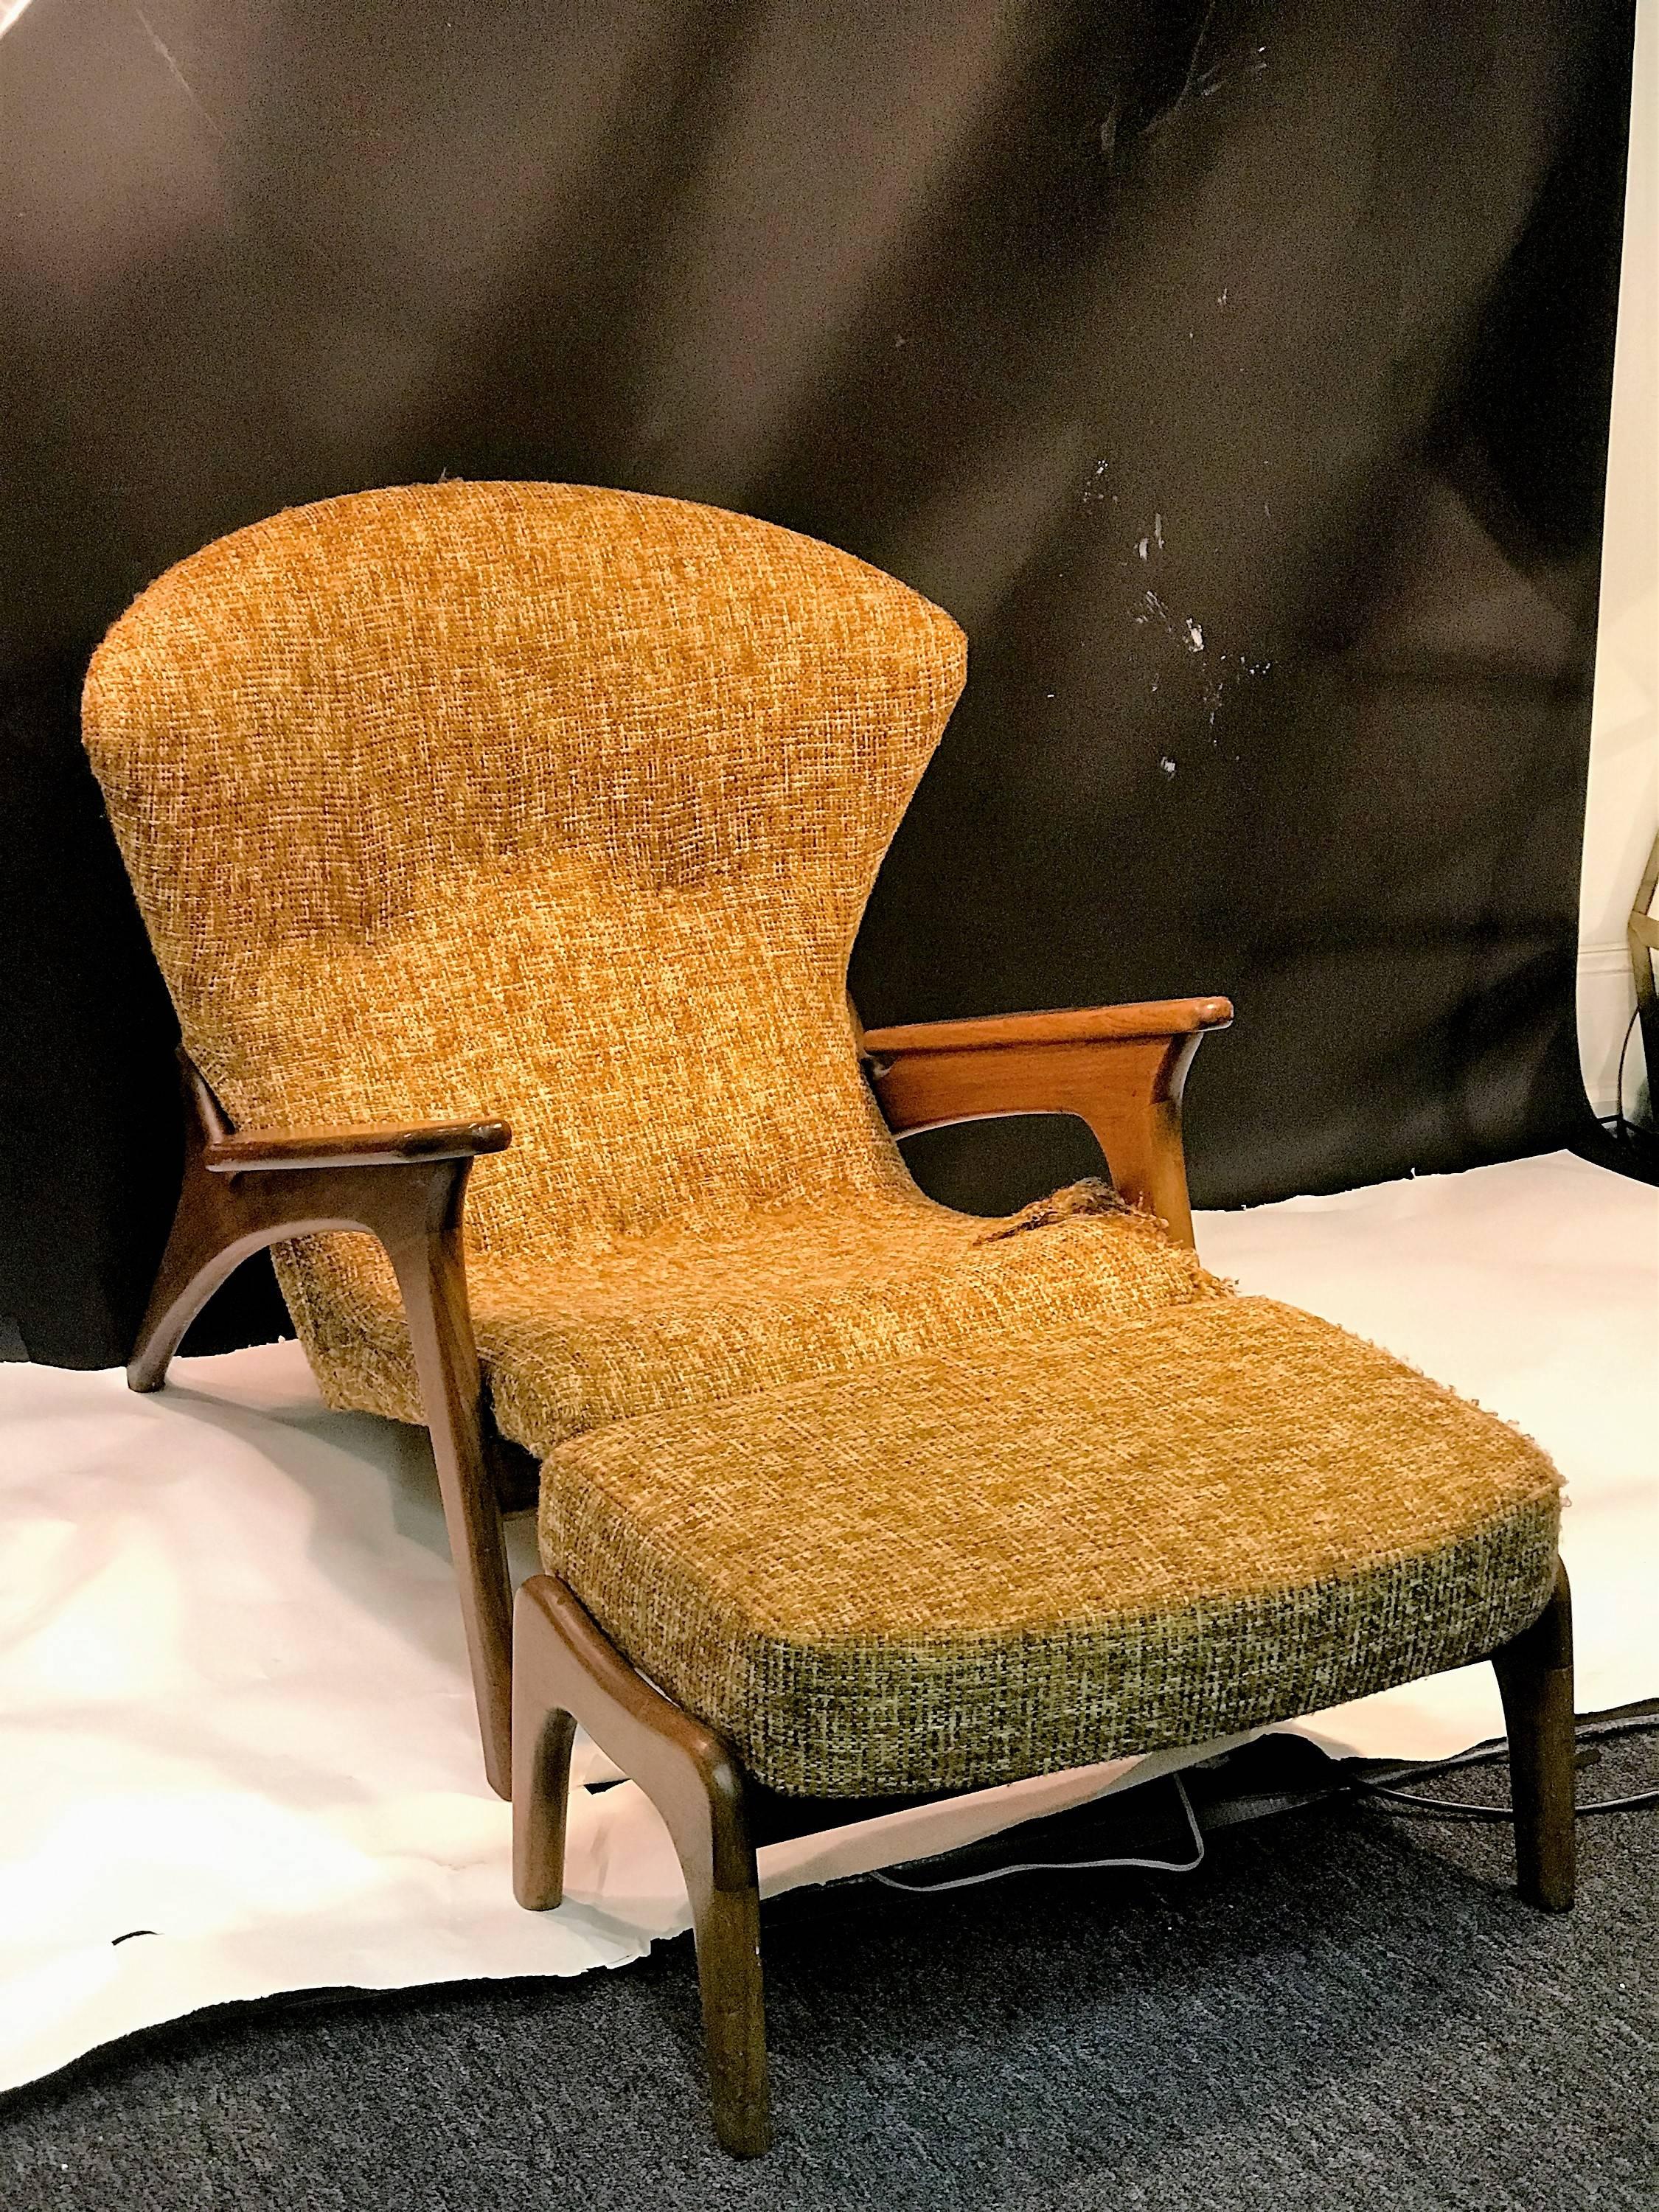 Fantastic Mid-Century iconic design of a highly sculptural chair of teak designed by Adrian Pearsall in original textured yellow fabric with ottoman. Interesting high end chair and ottoman for your living room.